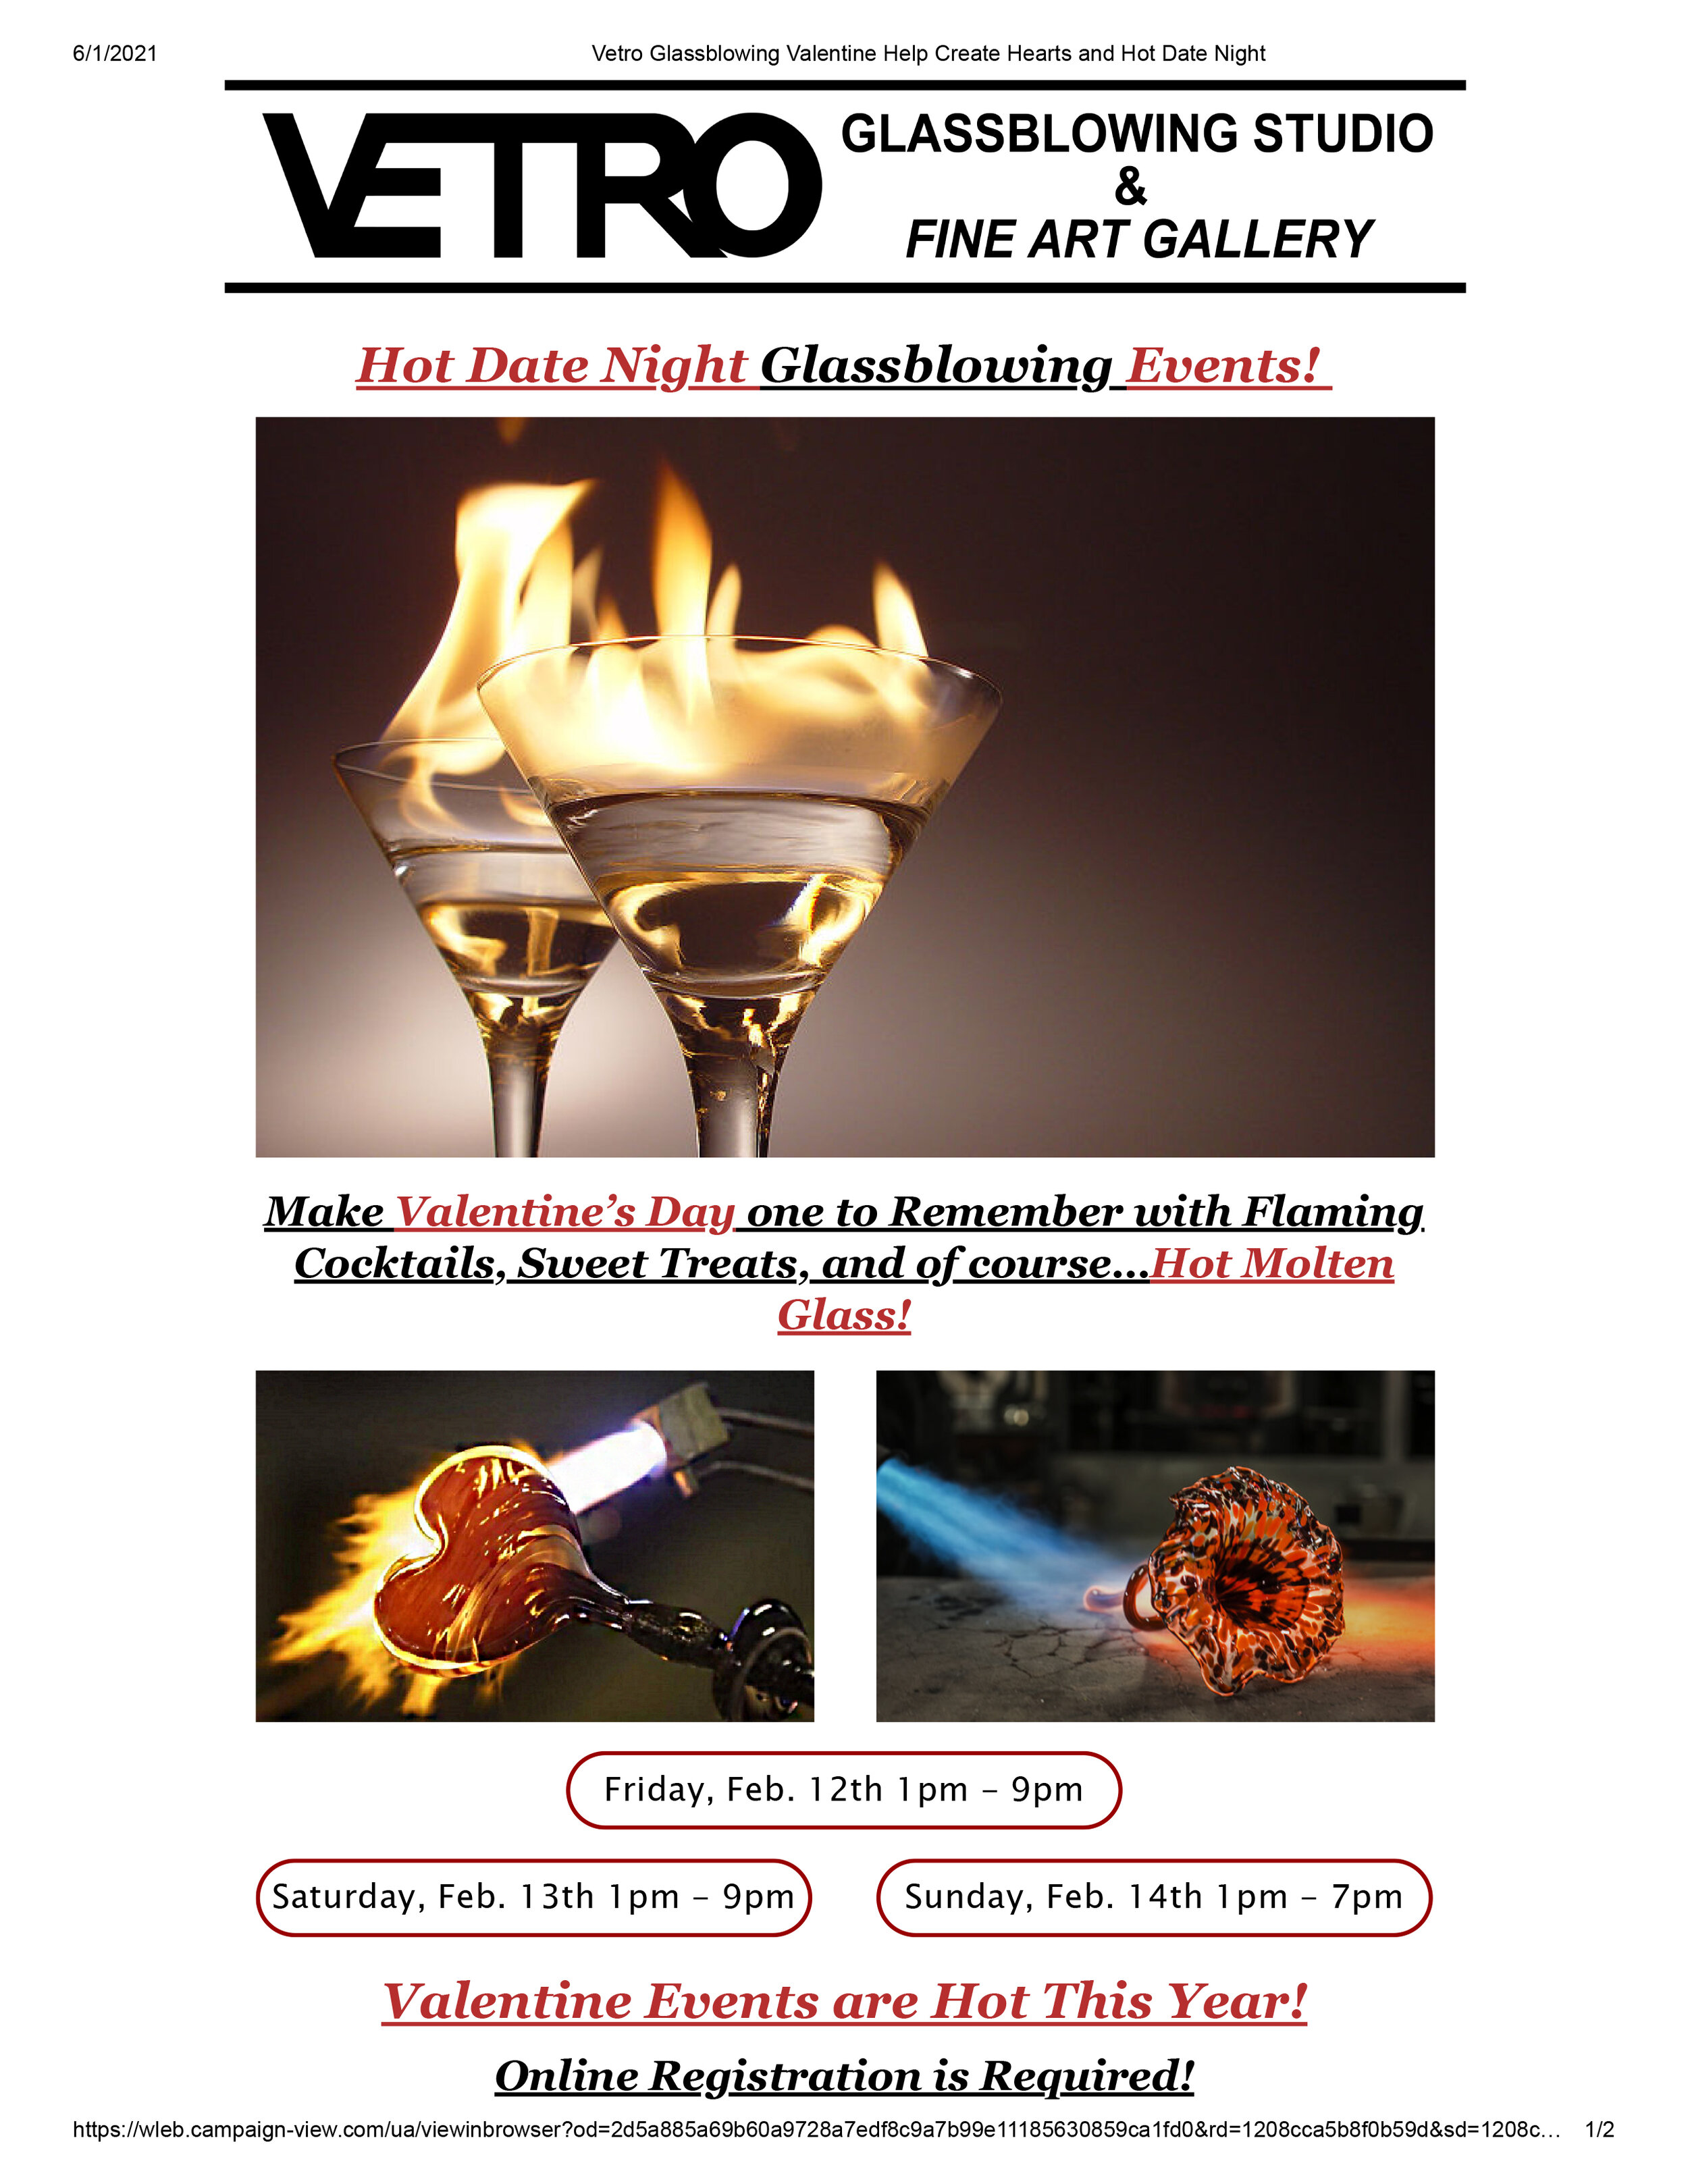 Email Campaigns -Vetro Glassblowing Studio - Make Valentine’s Day one to Remember with Flaming Cocktails-1.jpg